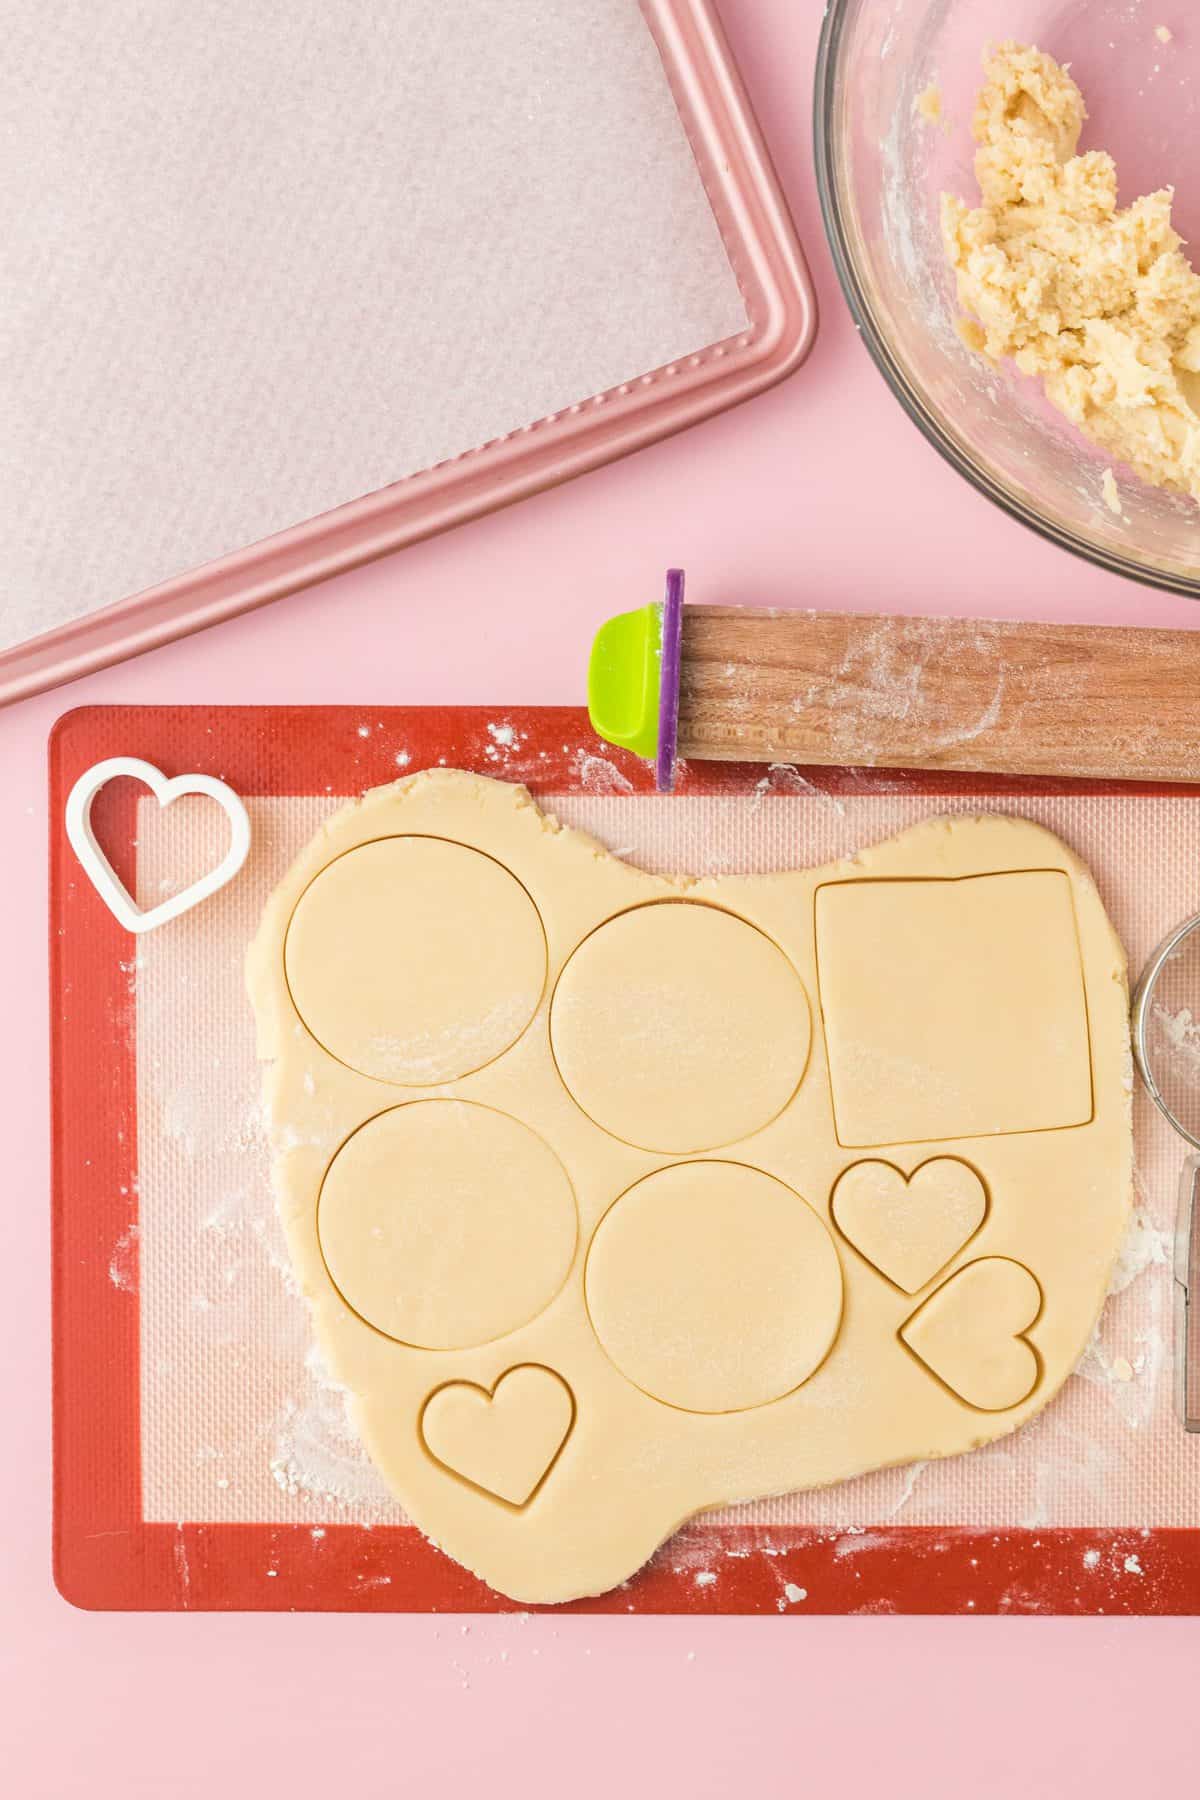 cutting out the sugar cookie dough on silpat surface